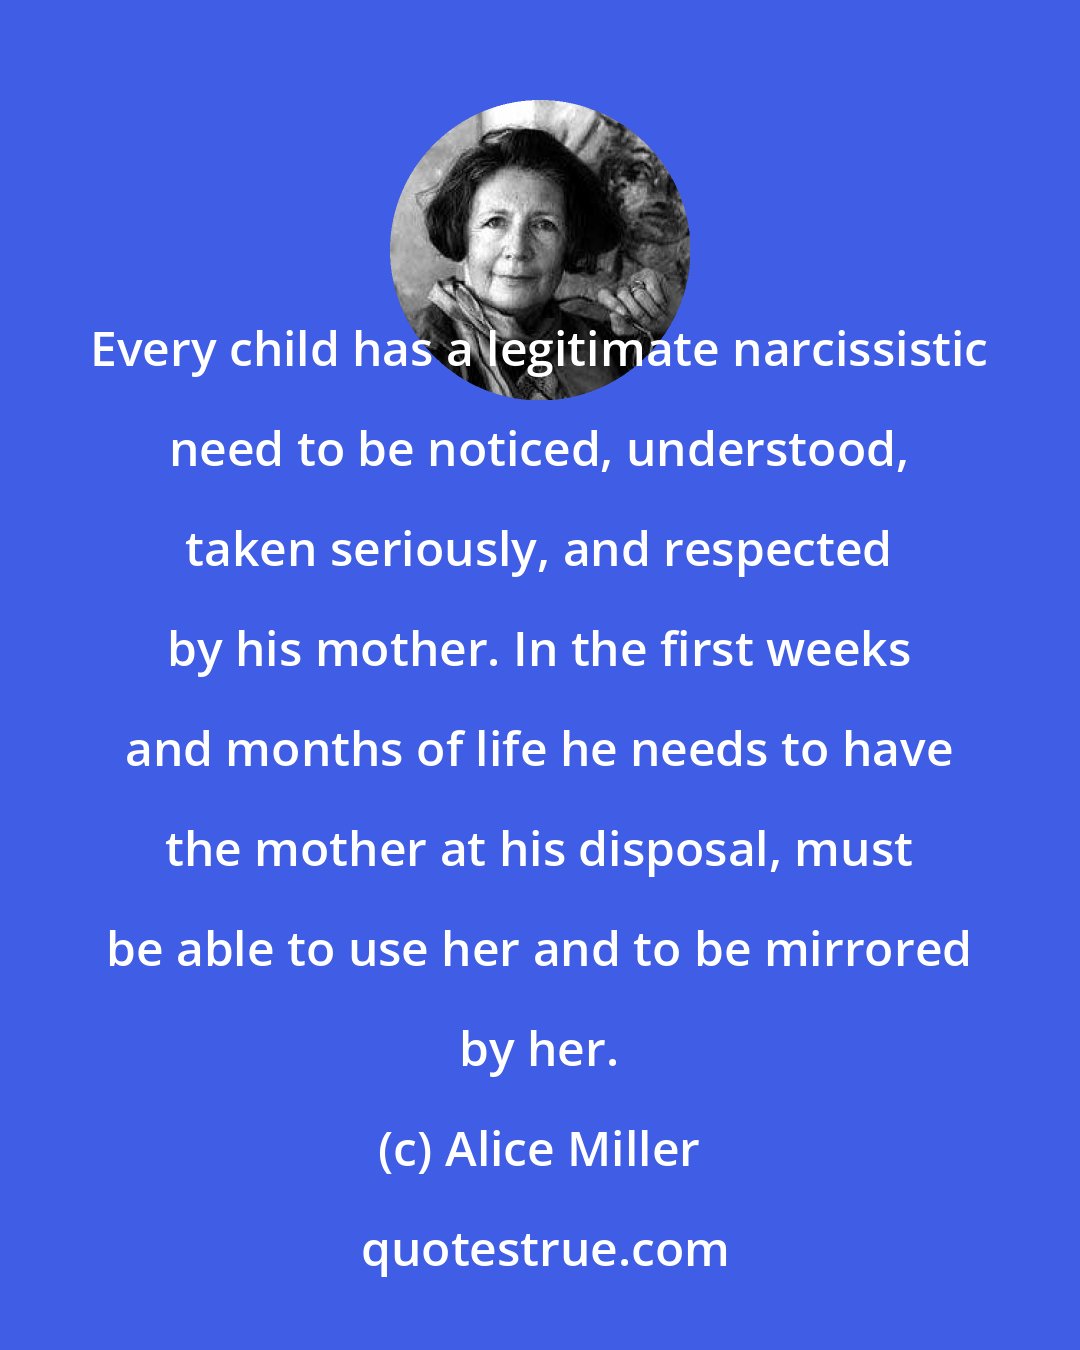 Alice Miller: Every child has a legitimate narcissistic need to be noticed, understood, taken seriously, and respected by his mother. In the first weeks and months of life he needs to have the mother at his disposal, must be able to use her and to be mirrored by her.